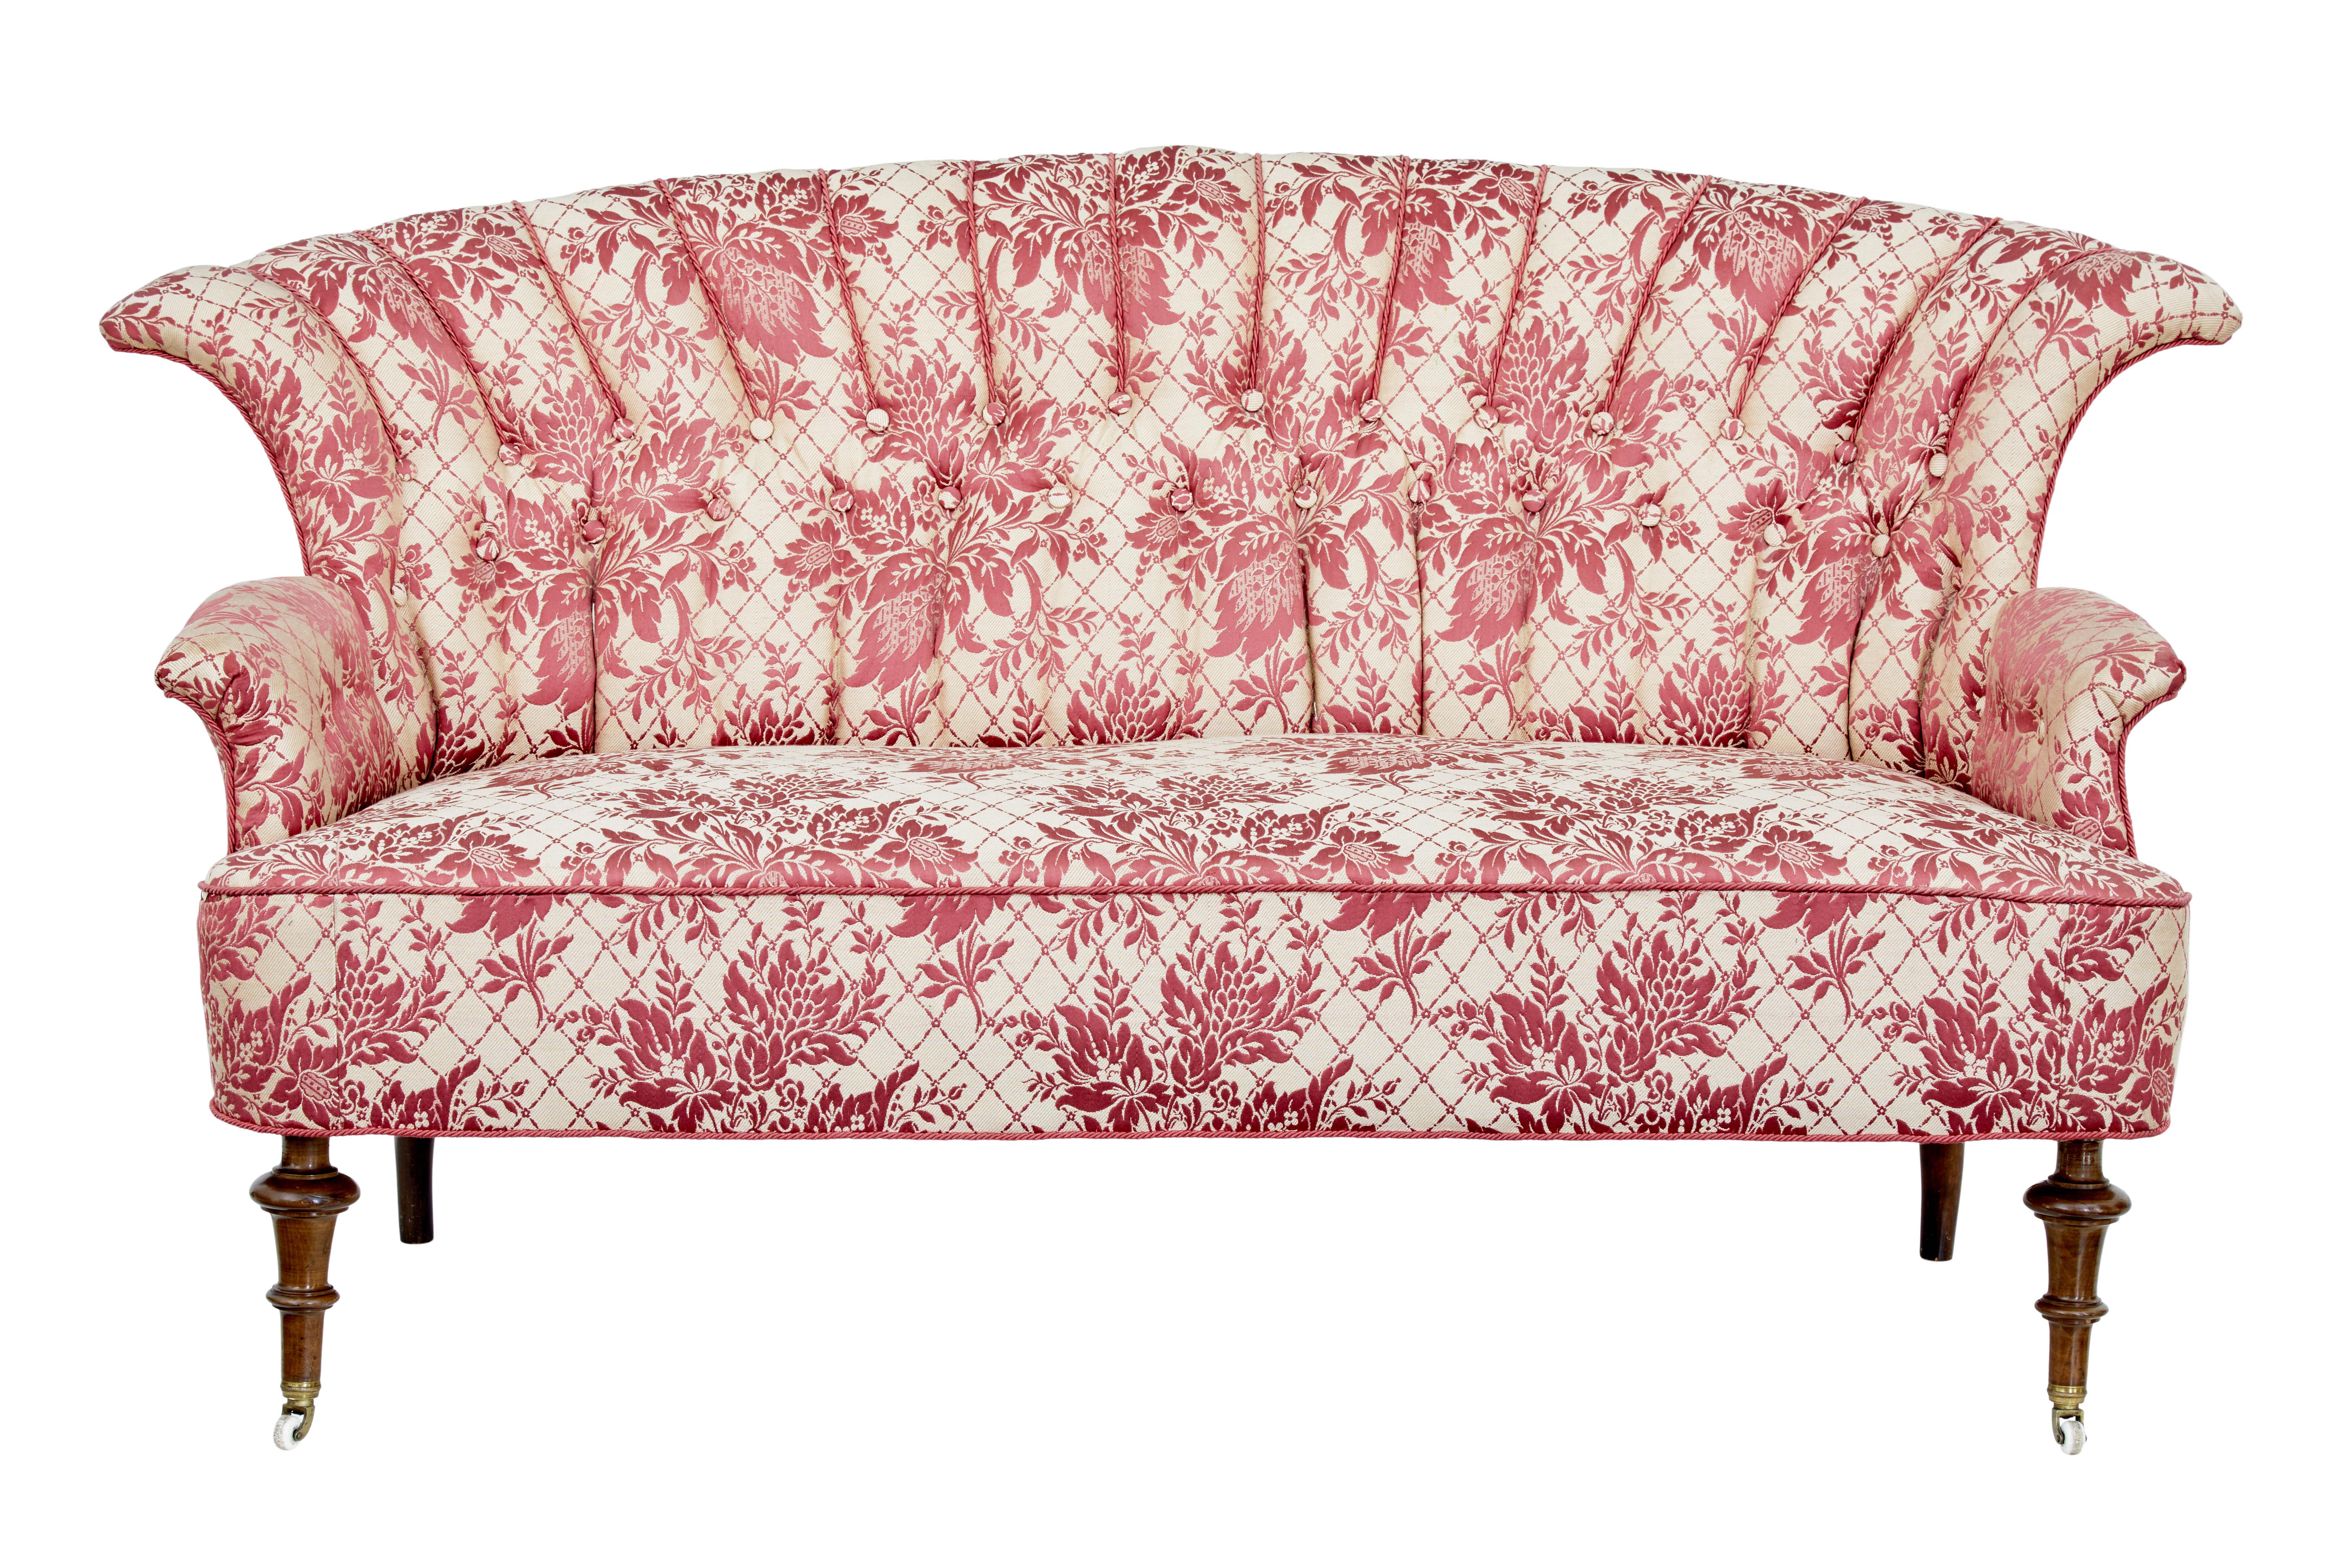 Striking 3-piece salon suite, circa 1900.

Suite comprises of a sofa and 2 matching chairs. Each with fan shell backs, piping and buttonback detail. Richly upholstered in cream material with red silk woven pattern. Wire back